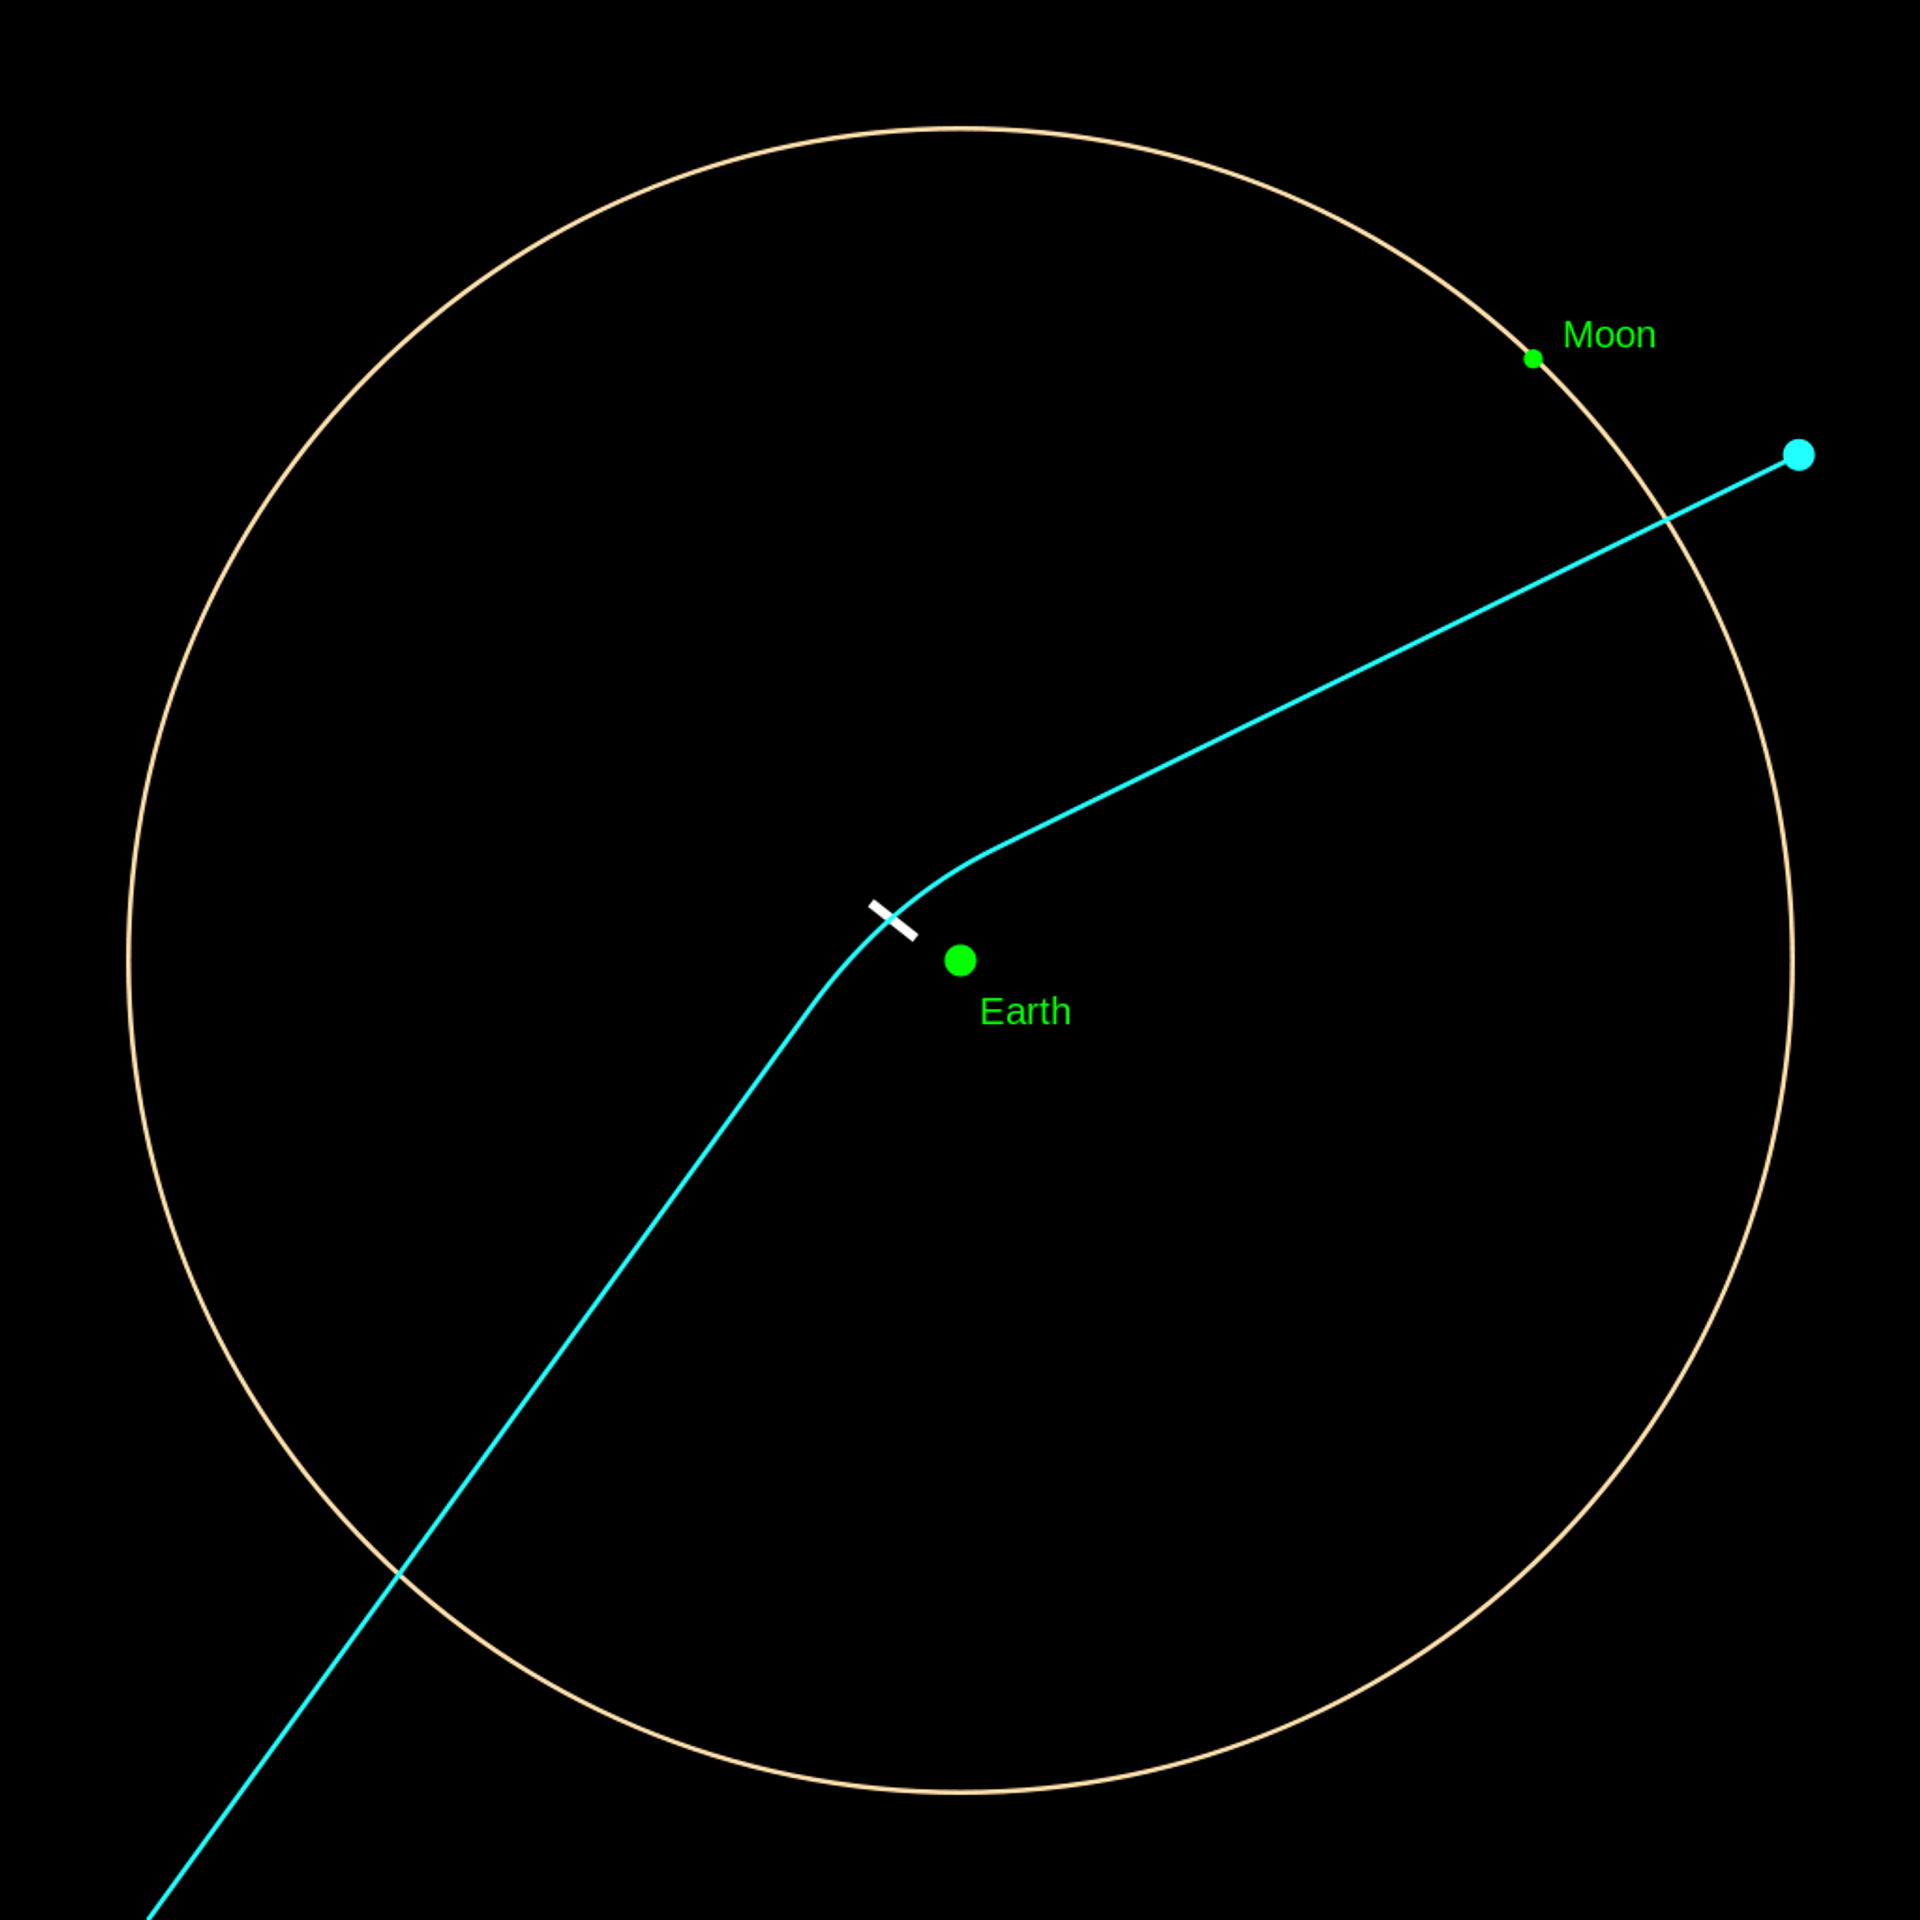 Model of the expected close approach of 99942 Apophis (previously better known by its provisional designation 2004 MN4) to the Earth and Moon on April 13, 2029. - Sputnik International, 1920, 26.02.2022